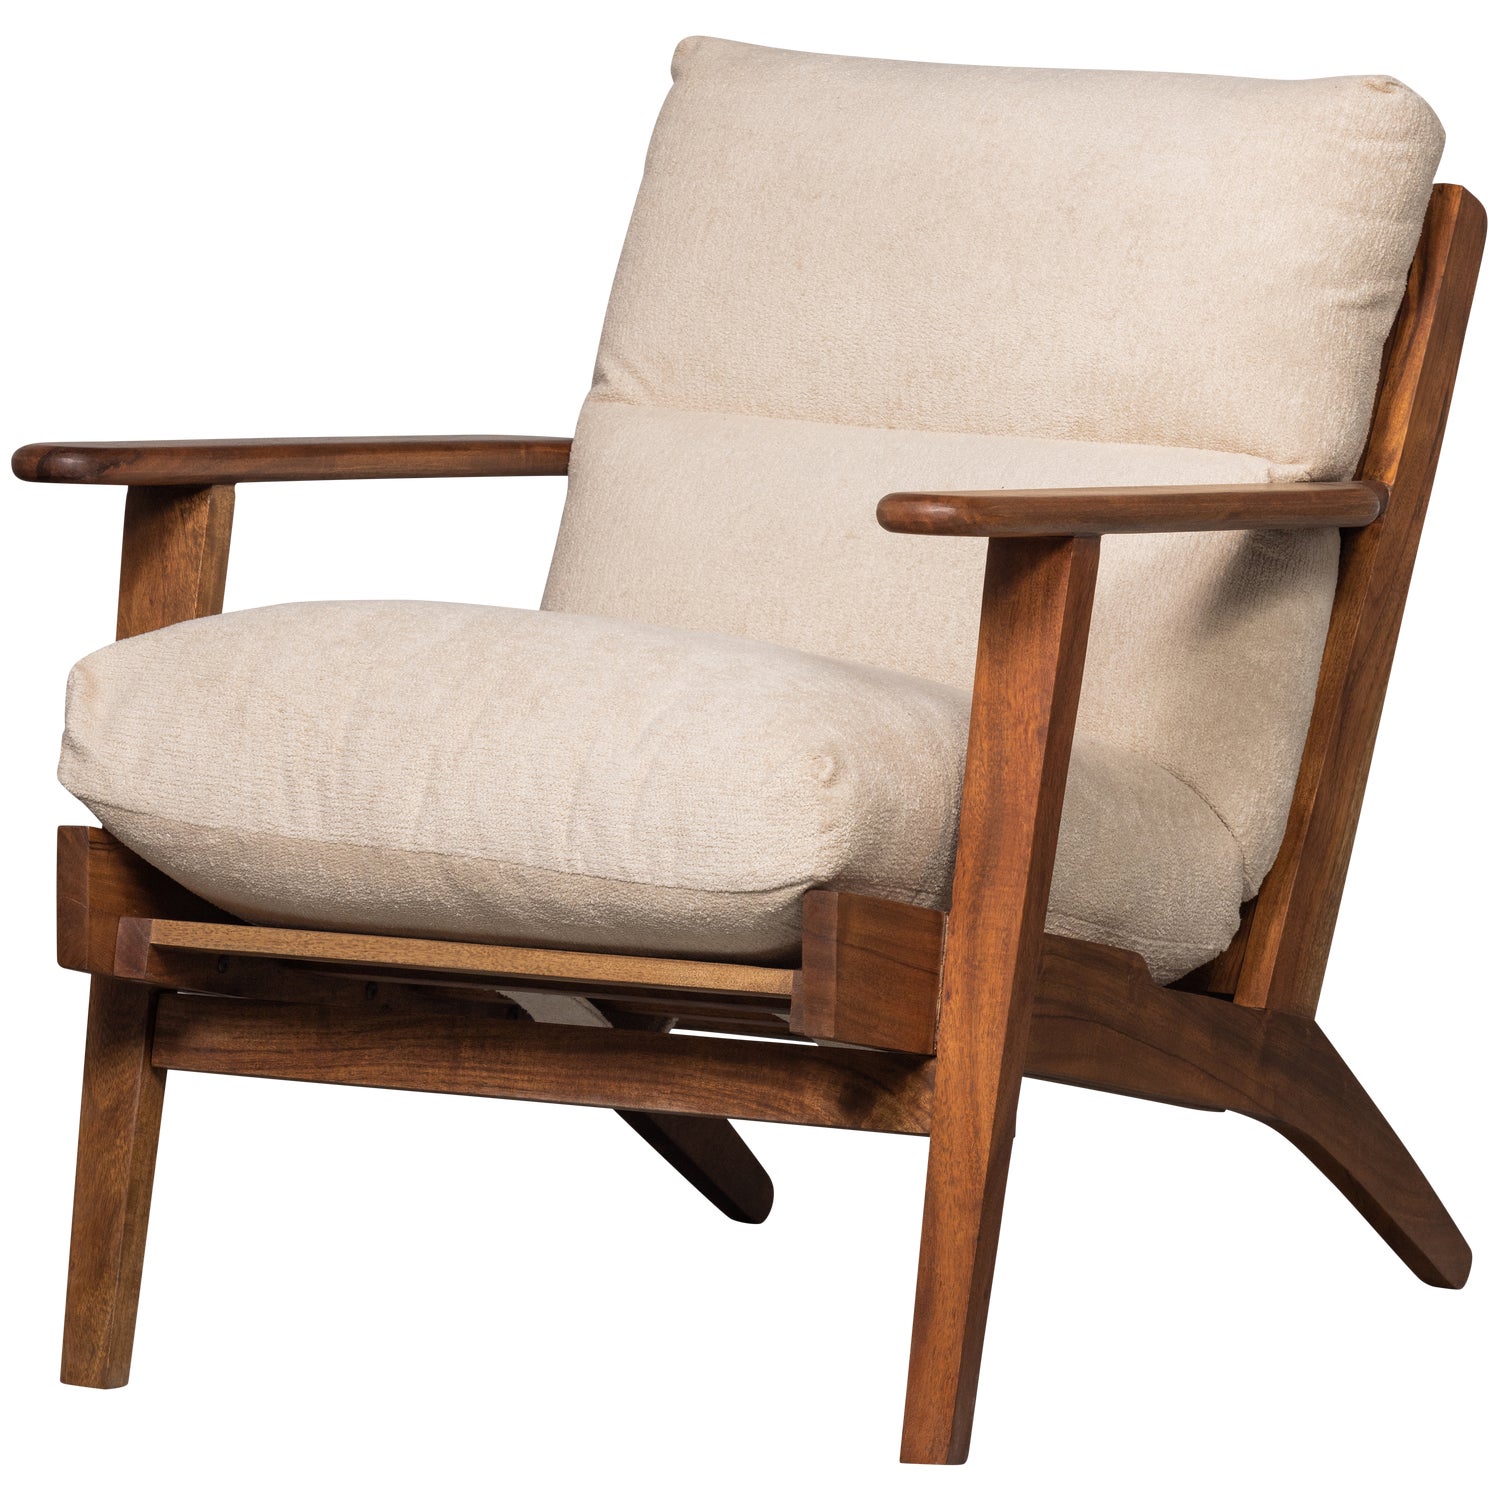 373975-N-02_VS_BP_Houston_fauteuil_boucle_hout_naturel_SA.png?auto=webp&format=png&width=1500&height=1500